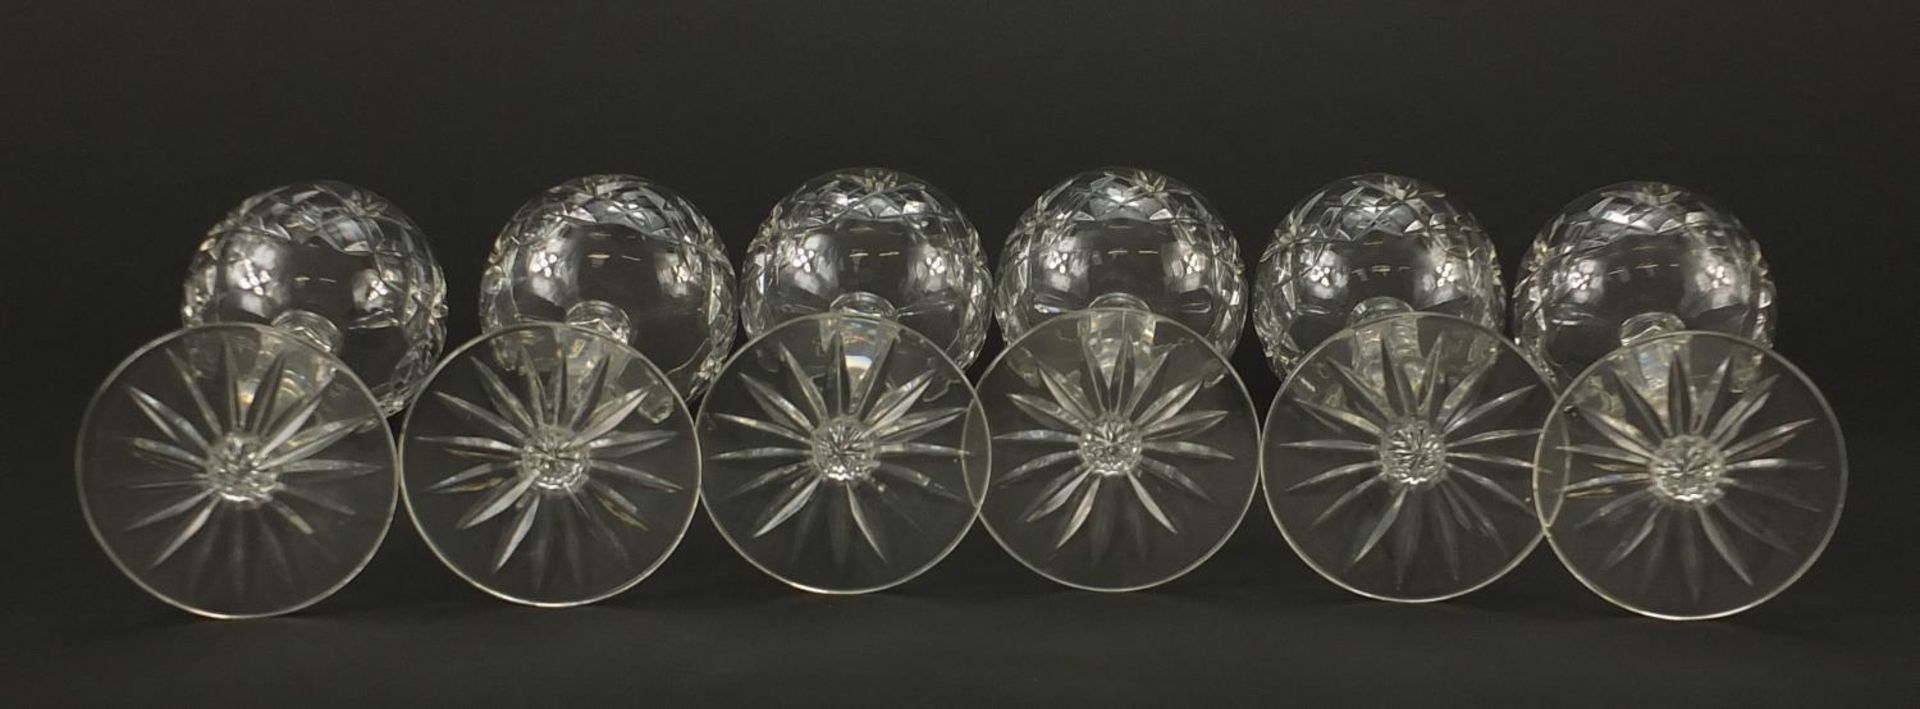 Set of six cut glass wine goblets, each 18.5cm high - Image 6 of 6